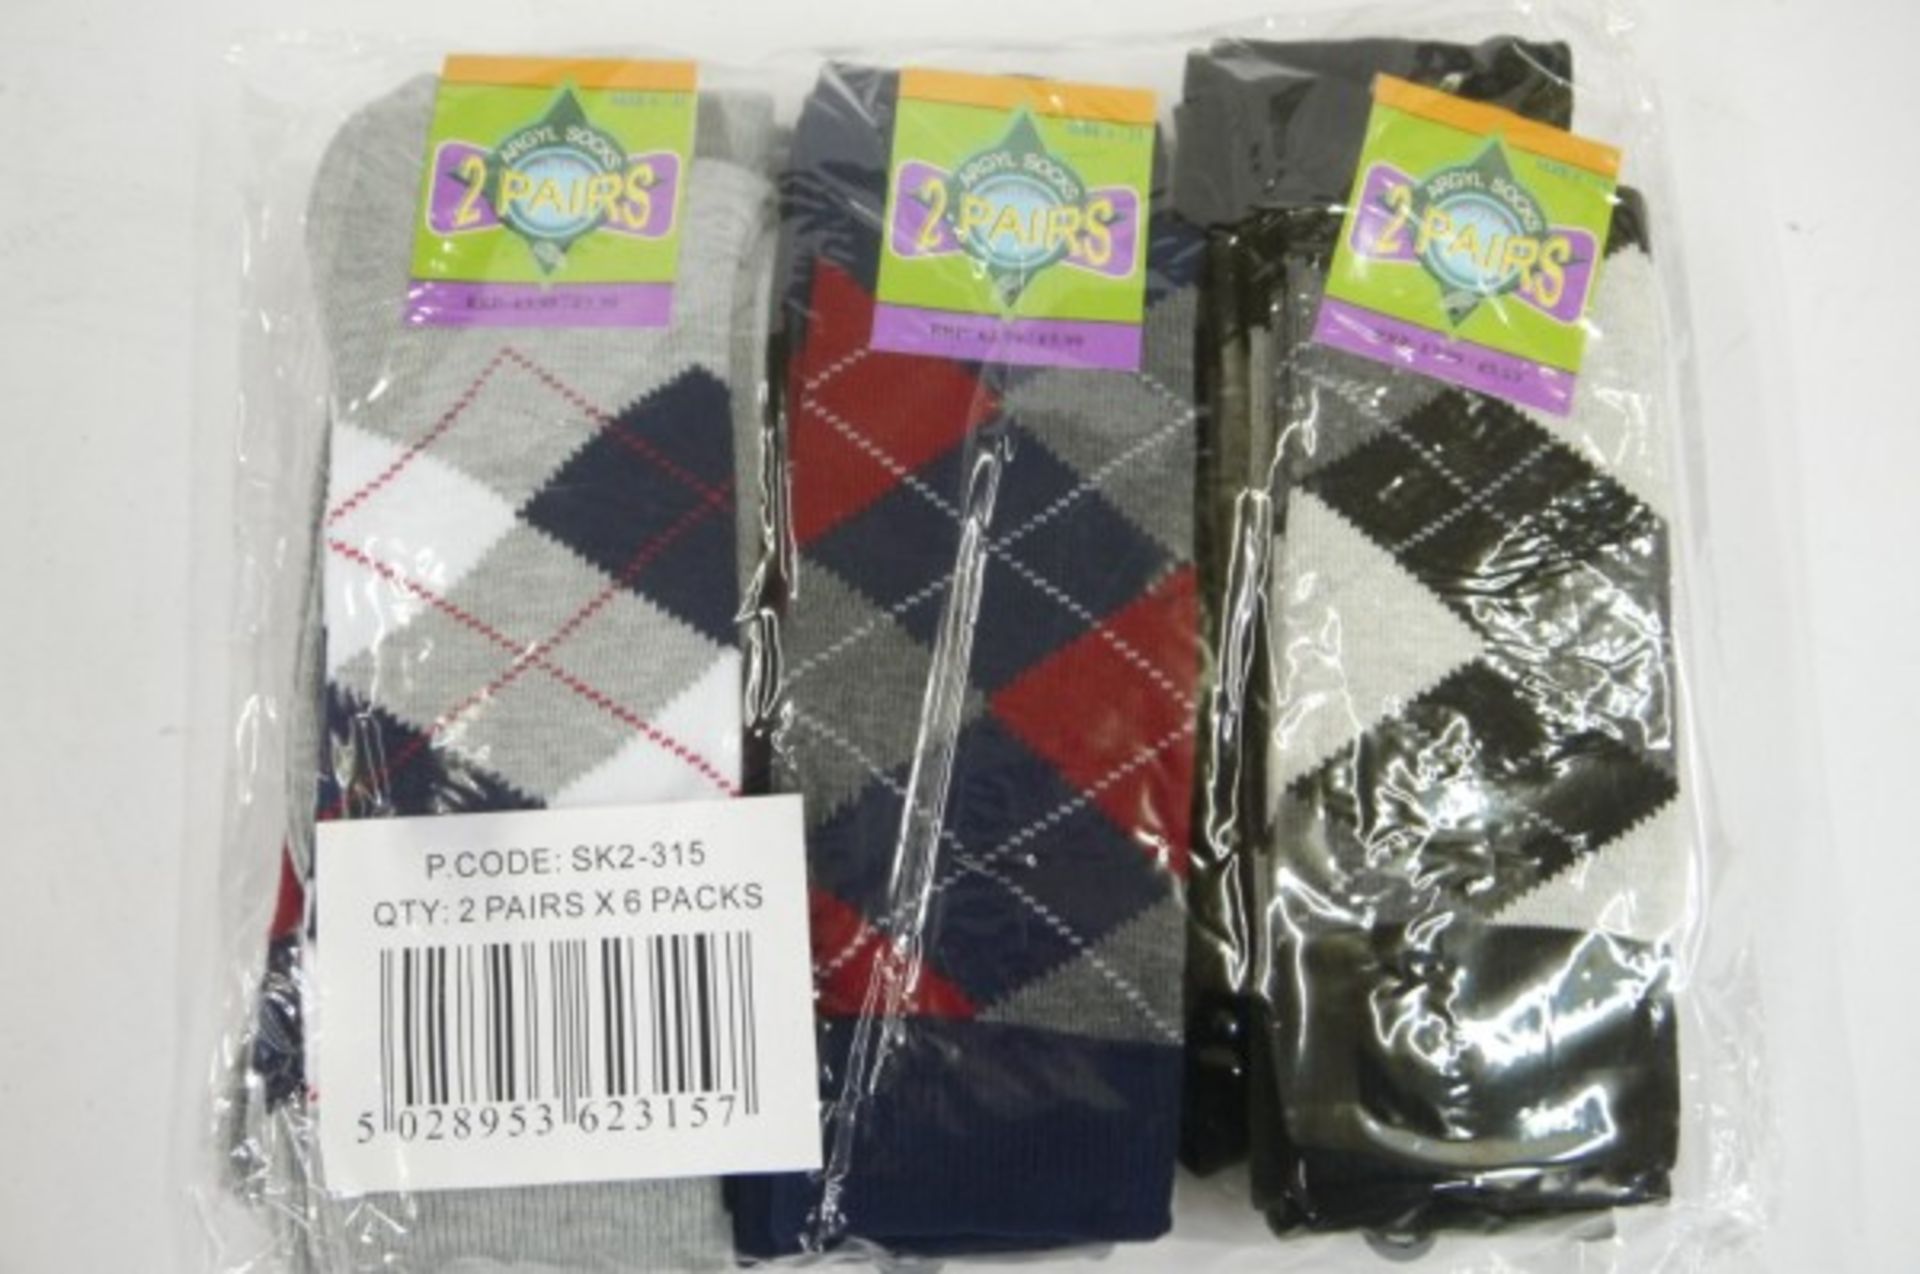 V *TRADE QTY* Brand New 12 Pairs Of Argyle Socks X 4 YOUR BID PRICE TO BE MULTIPLIED BY FOUR